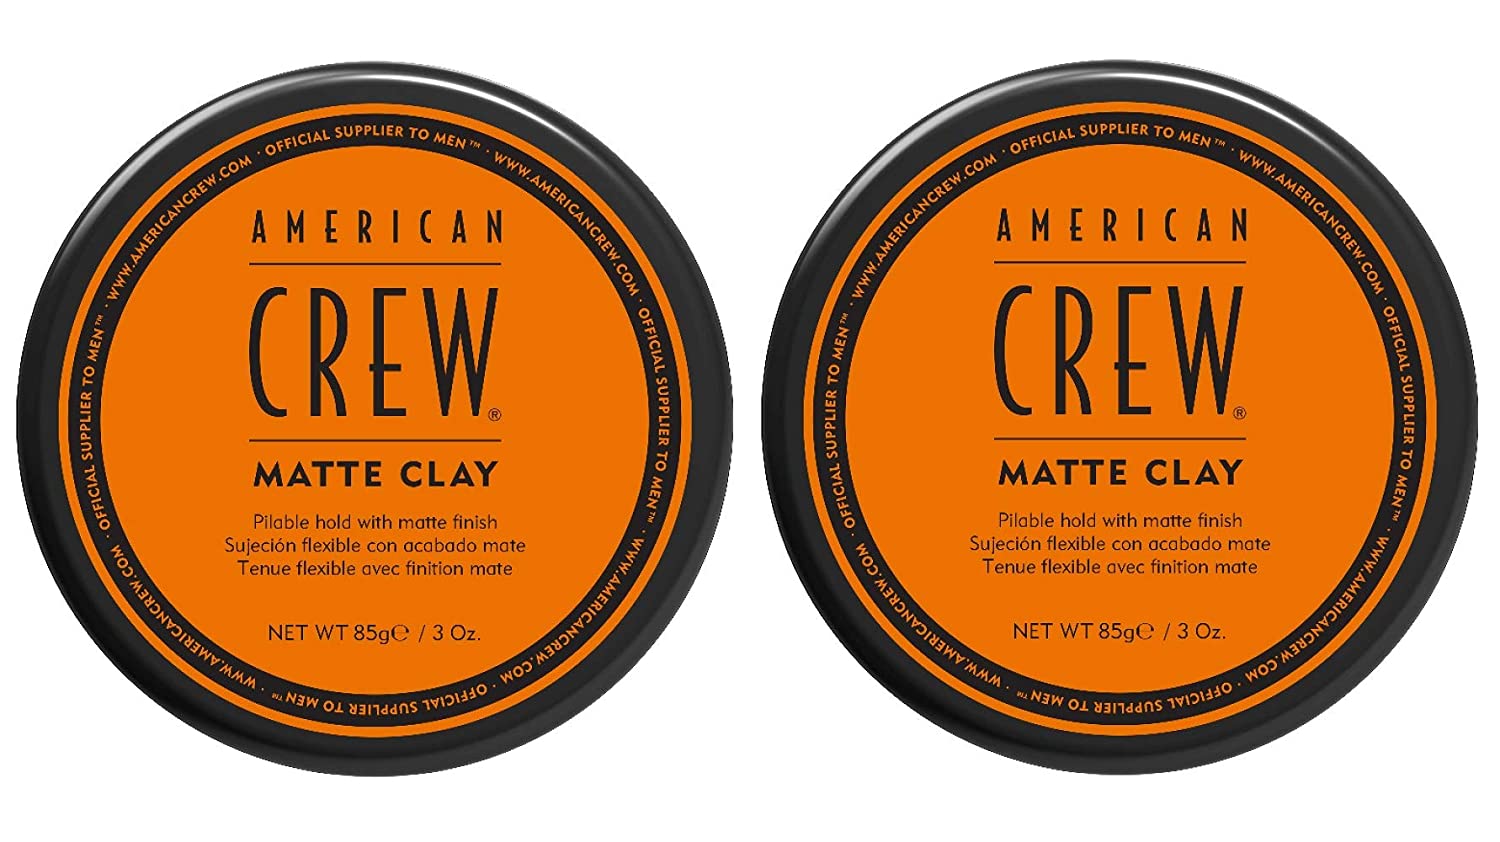 2 x American Crew Matte Clay Medium to Strong Hold Matte Finish 85 g